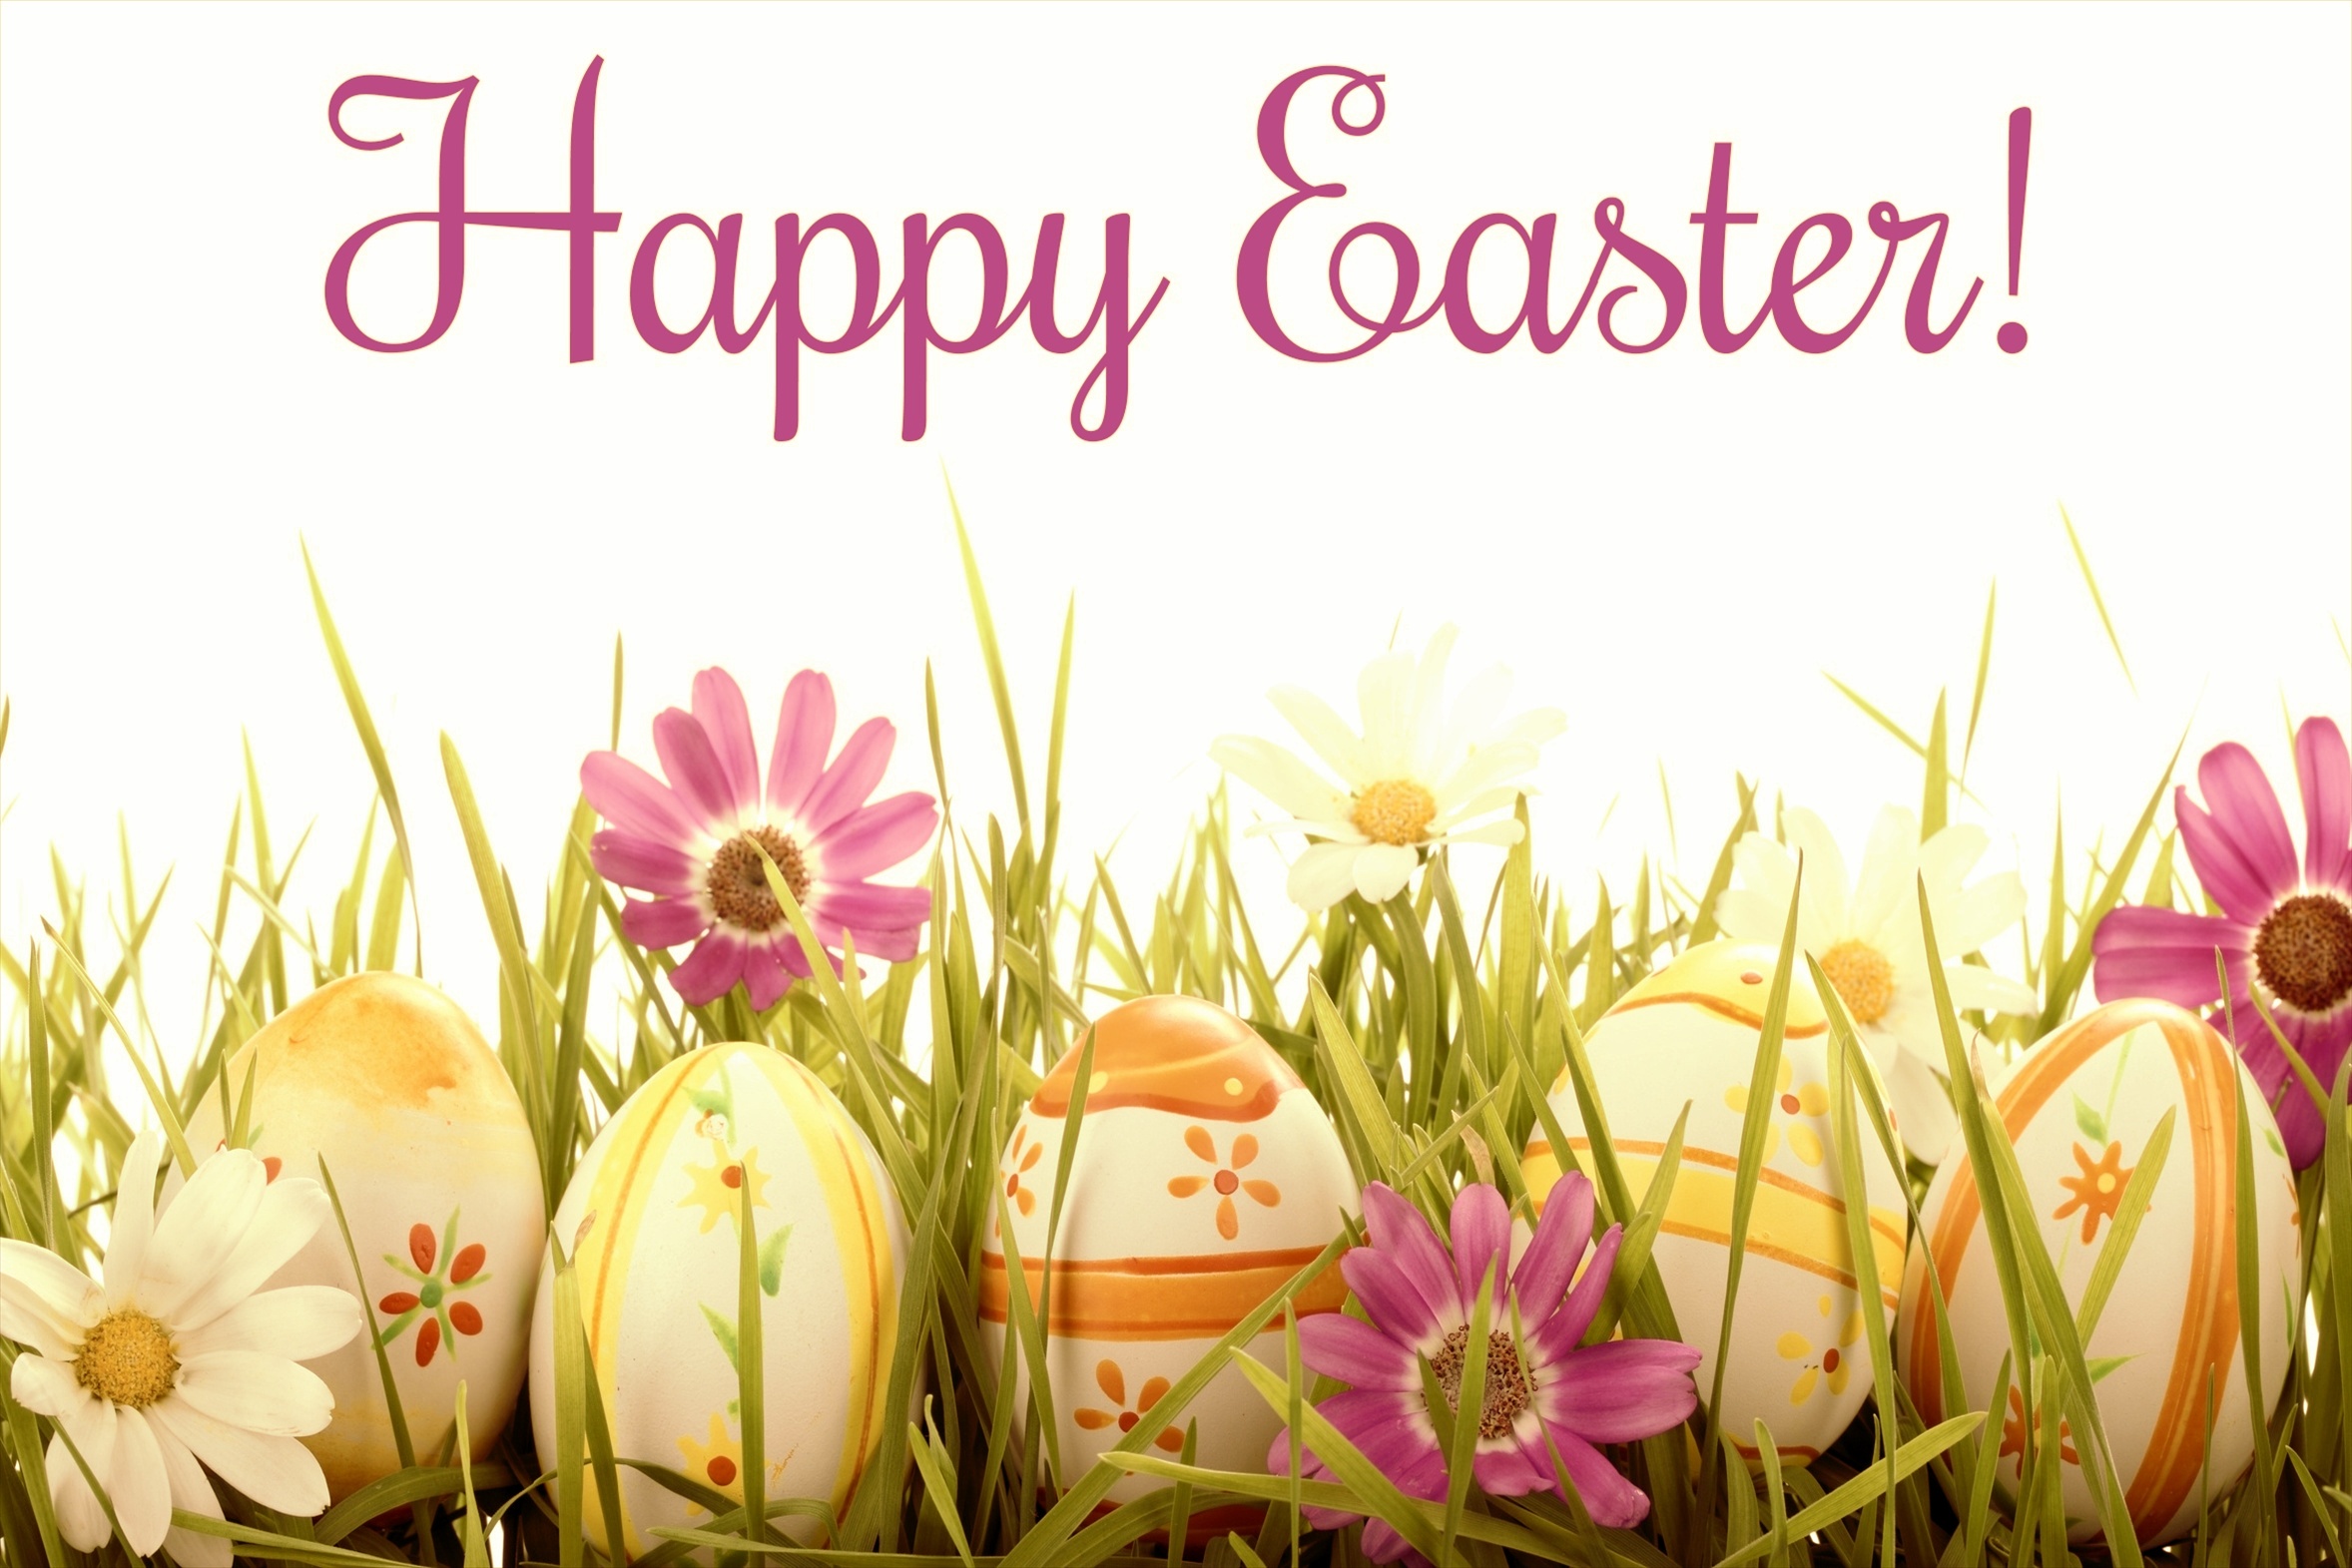 Happy Easter Sunday Wallpaper Images Photos Pictures 2015